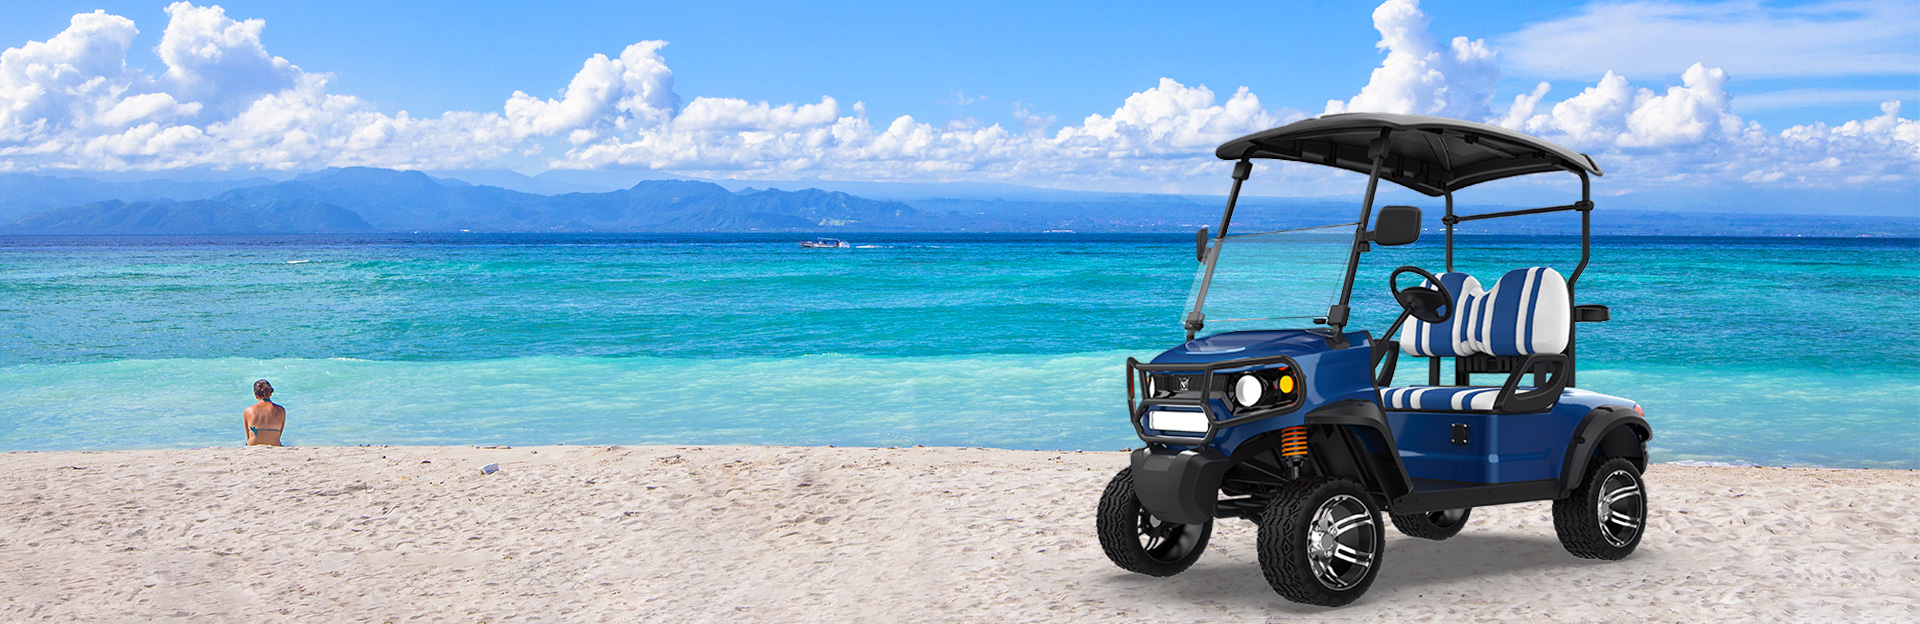 Embrace the Green, Cruise with Ease—The All-New Generation Golf Cart Takes Center Stage